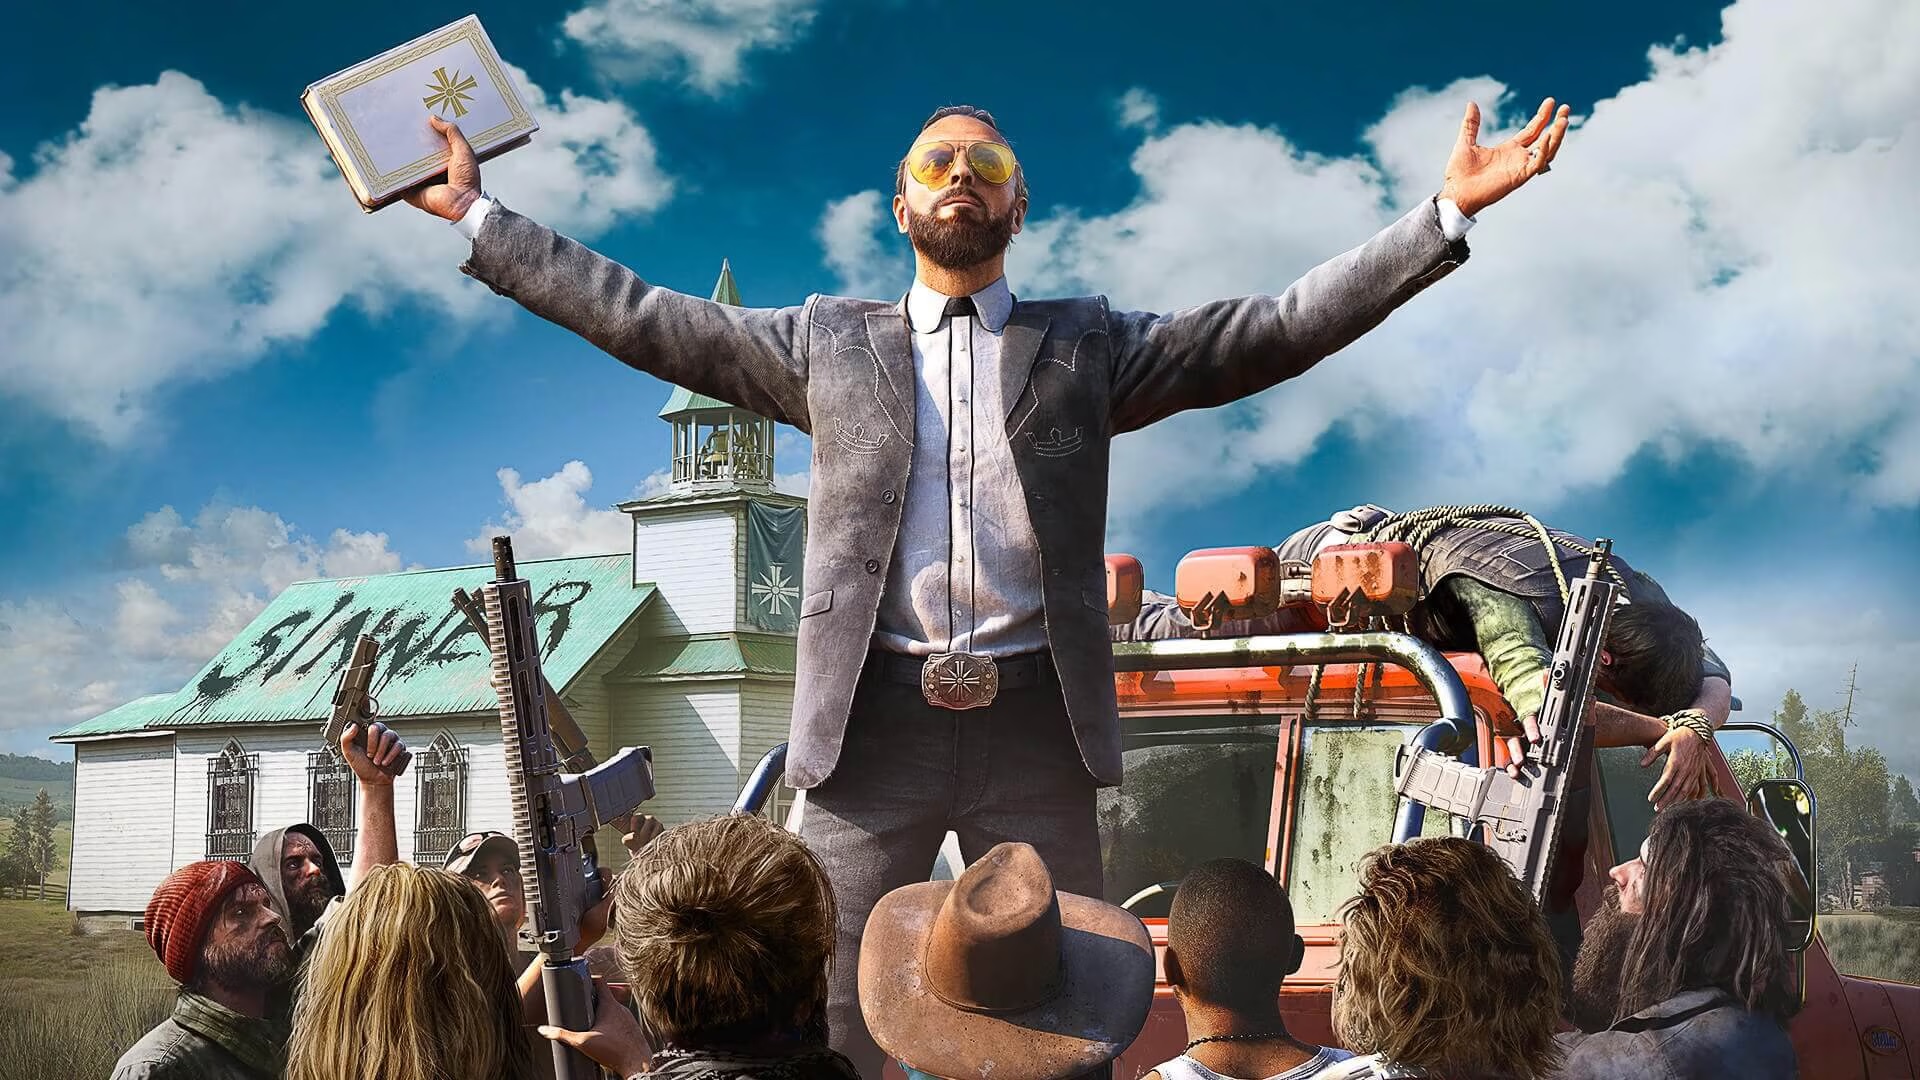 Far Cry 5 addresses religious fanaticism in its plot